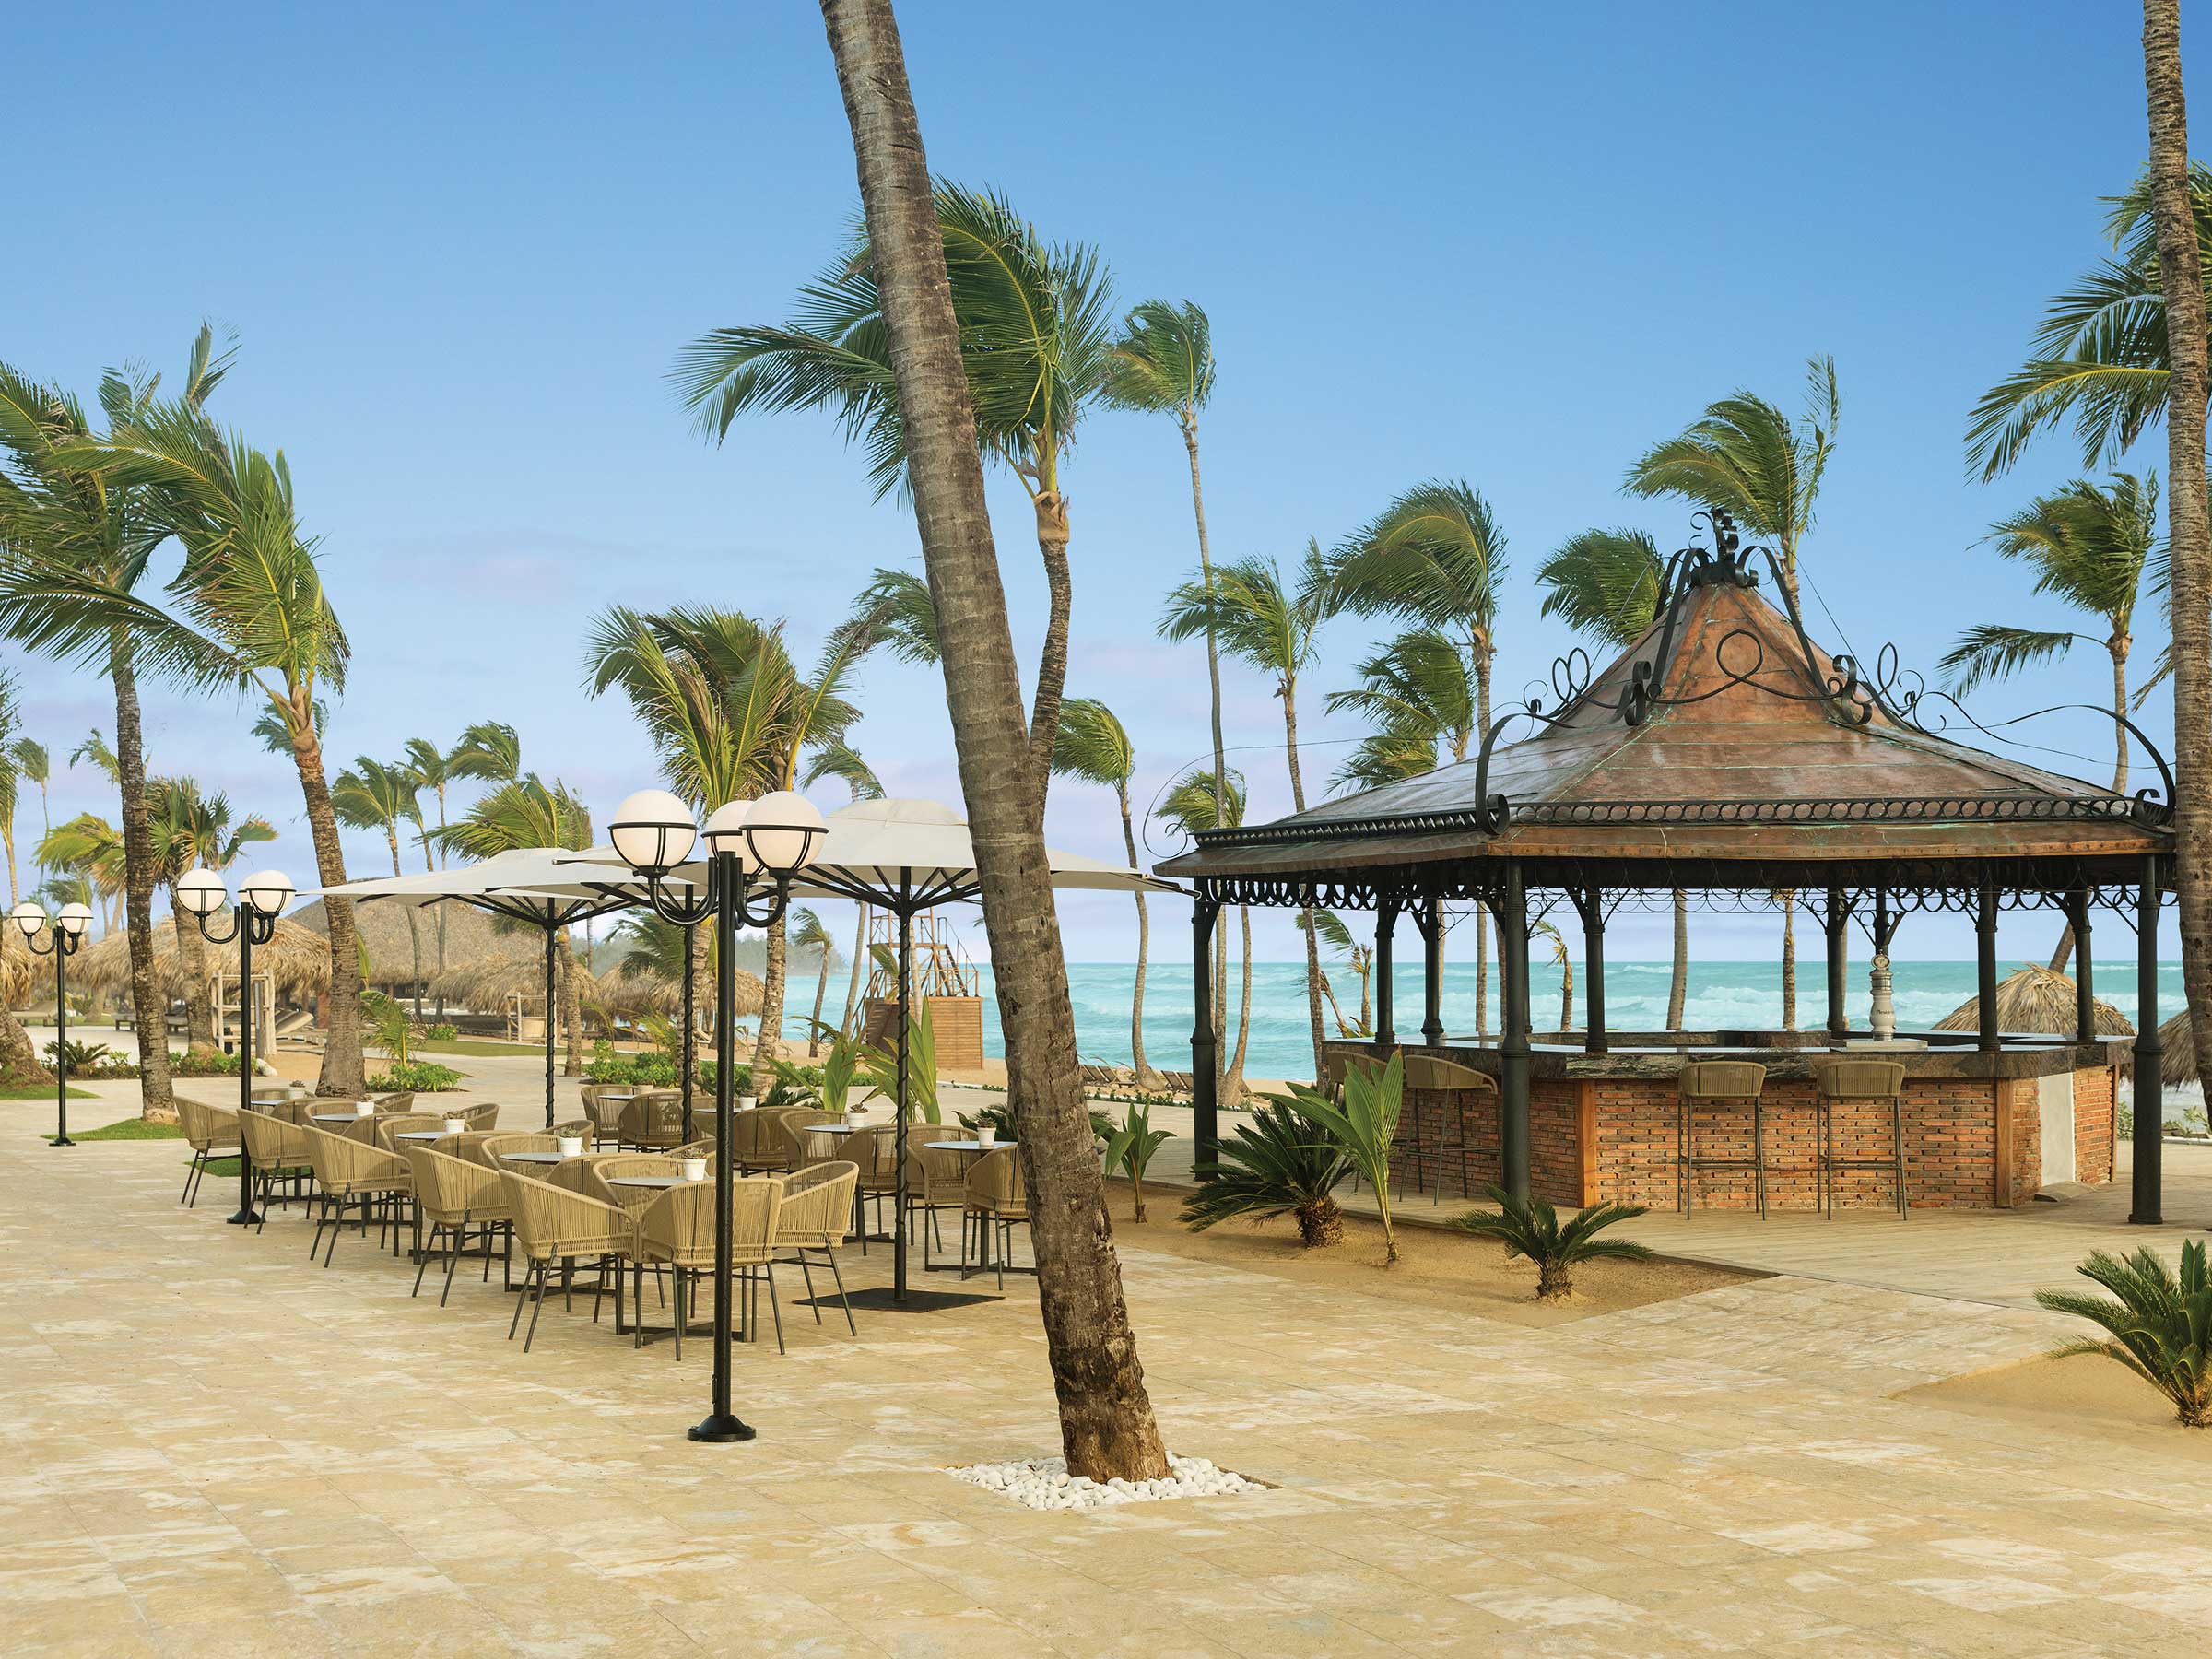 Premium Drinks and Ocean Views at Our Punta Cana Bars